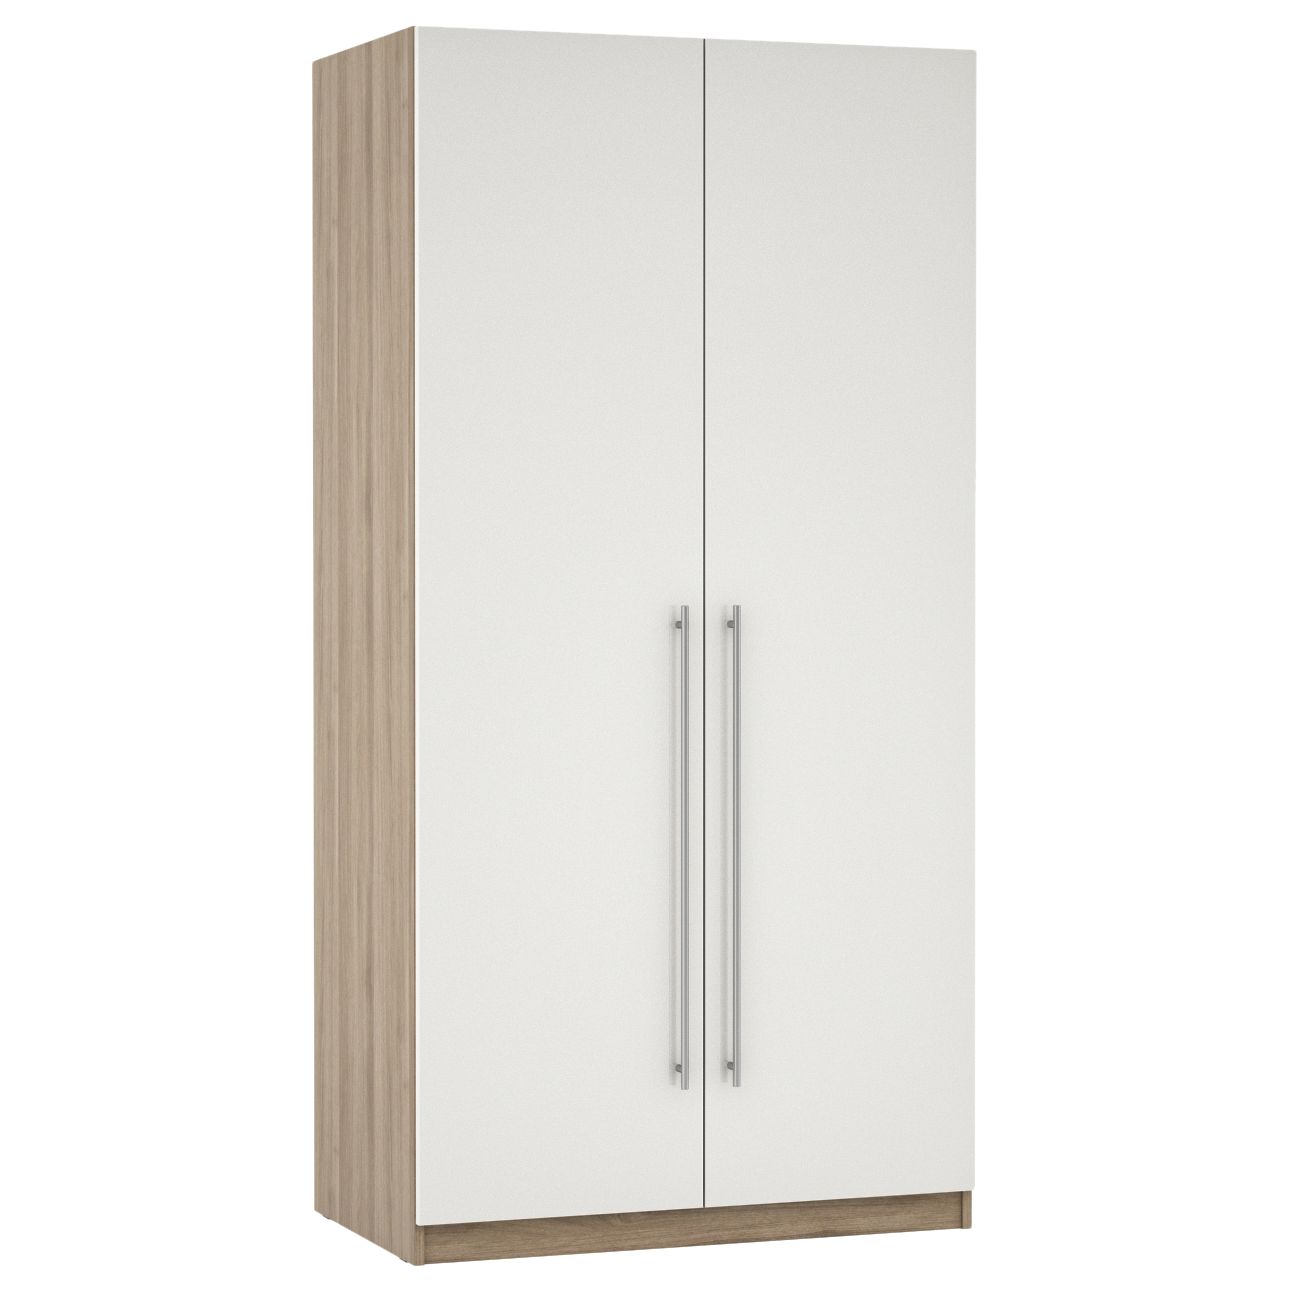 Photo of John lewis anyday mix it stainless steel long t-bar handle double wardrobe with internal drawers gloss white slab/grey ash